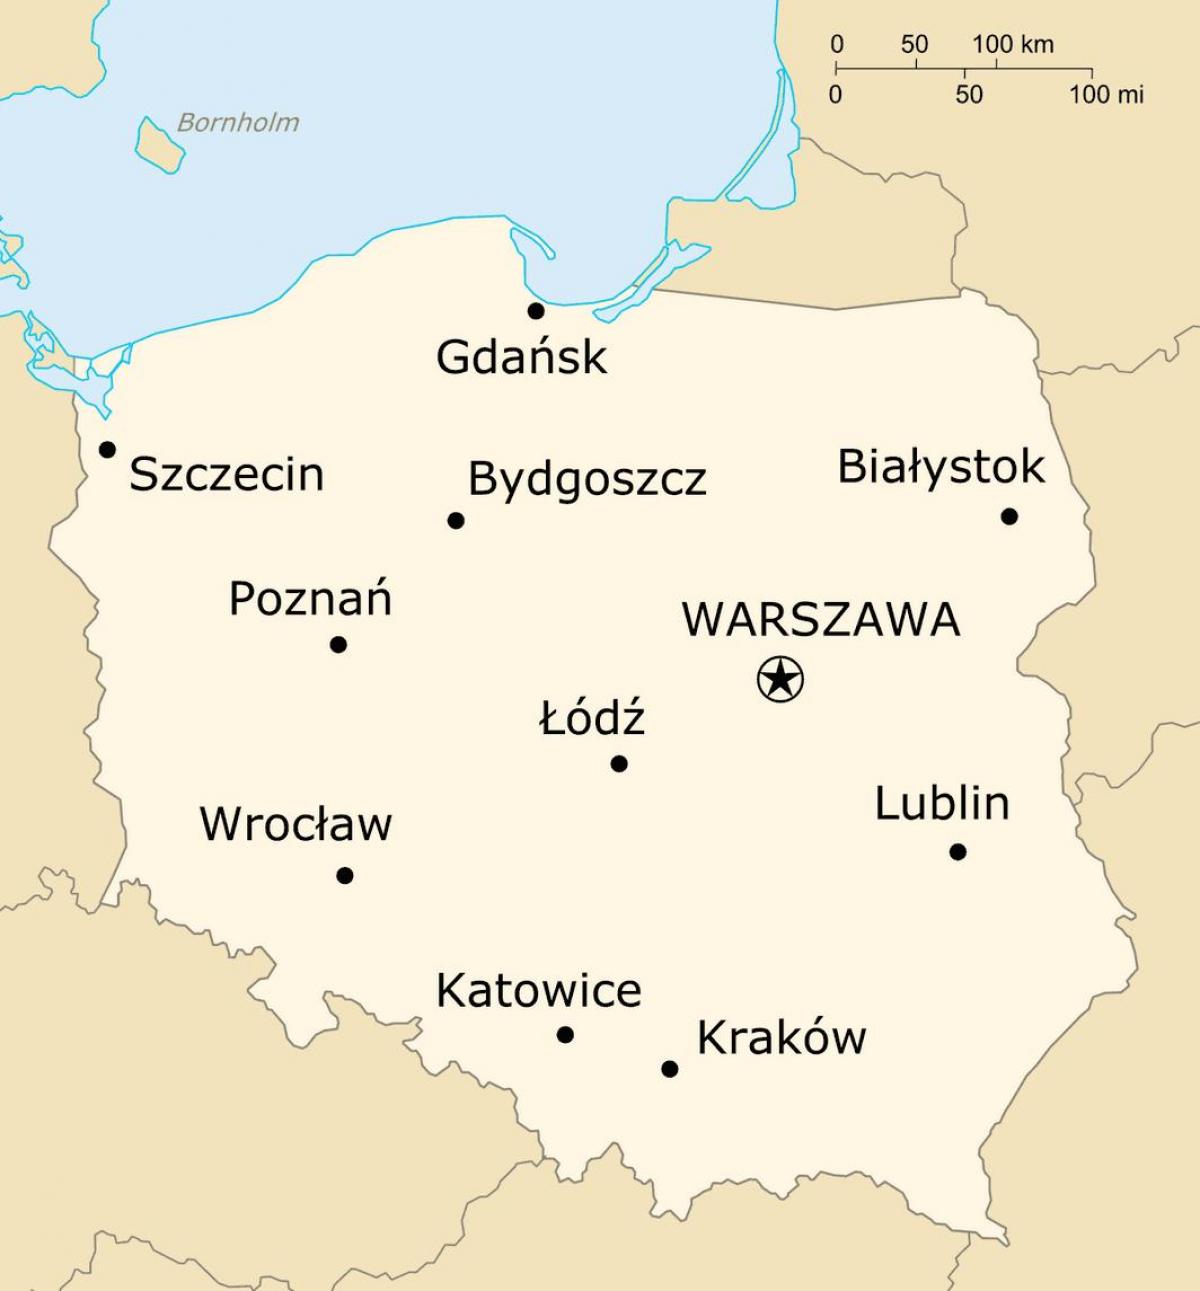 Map of Poland with main cities